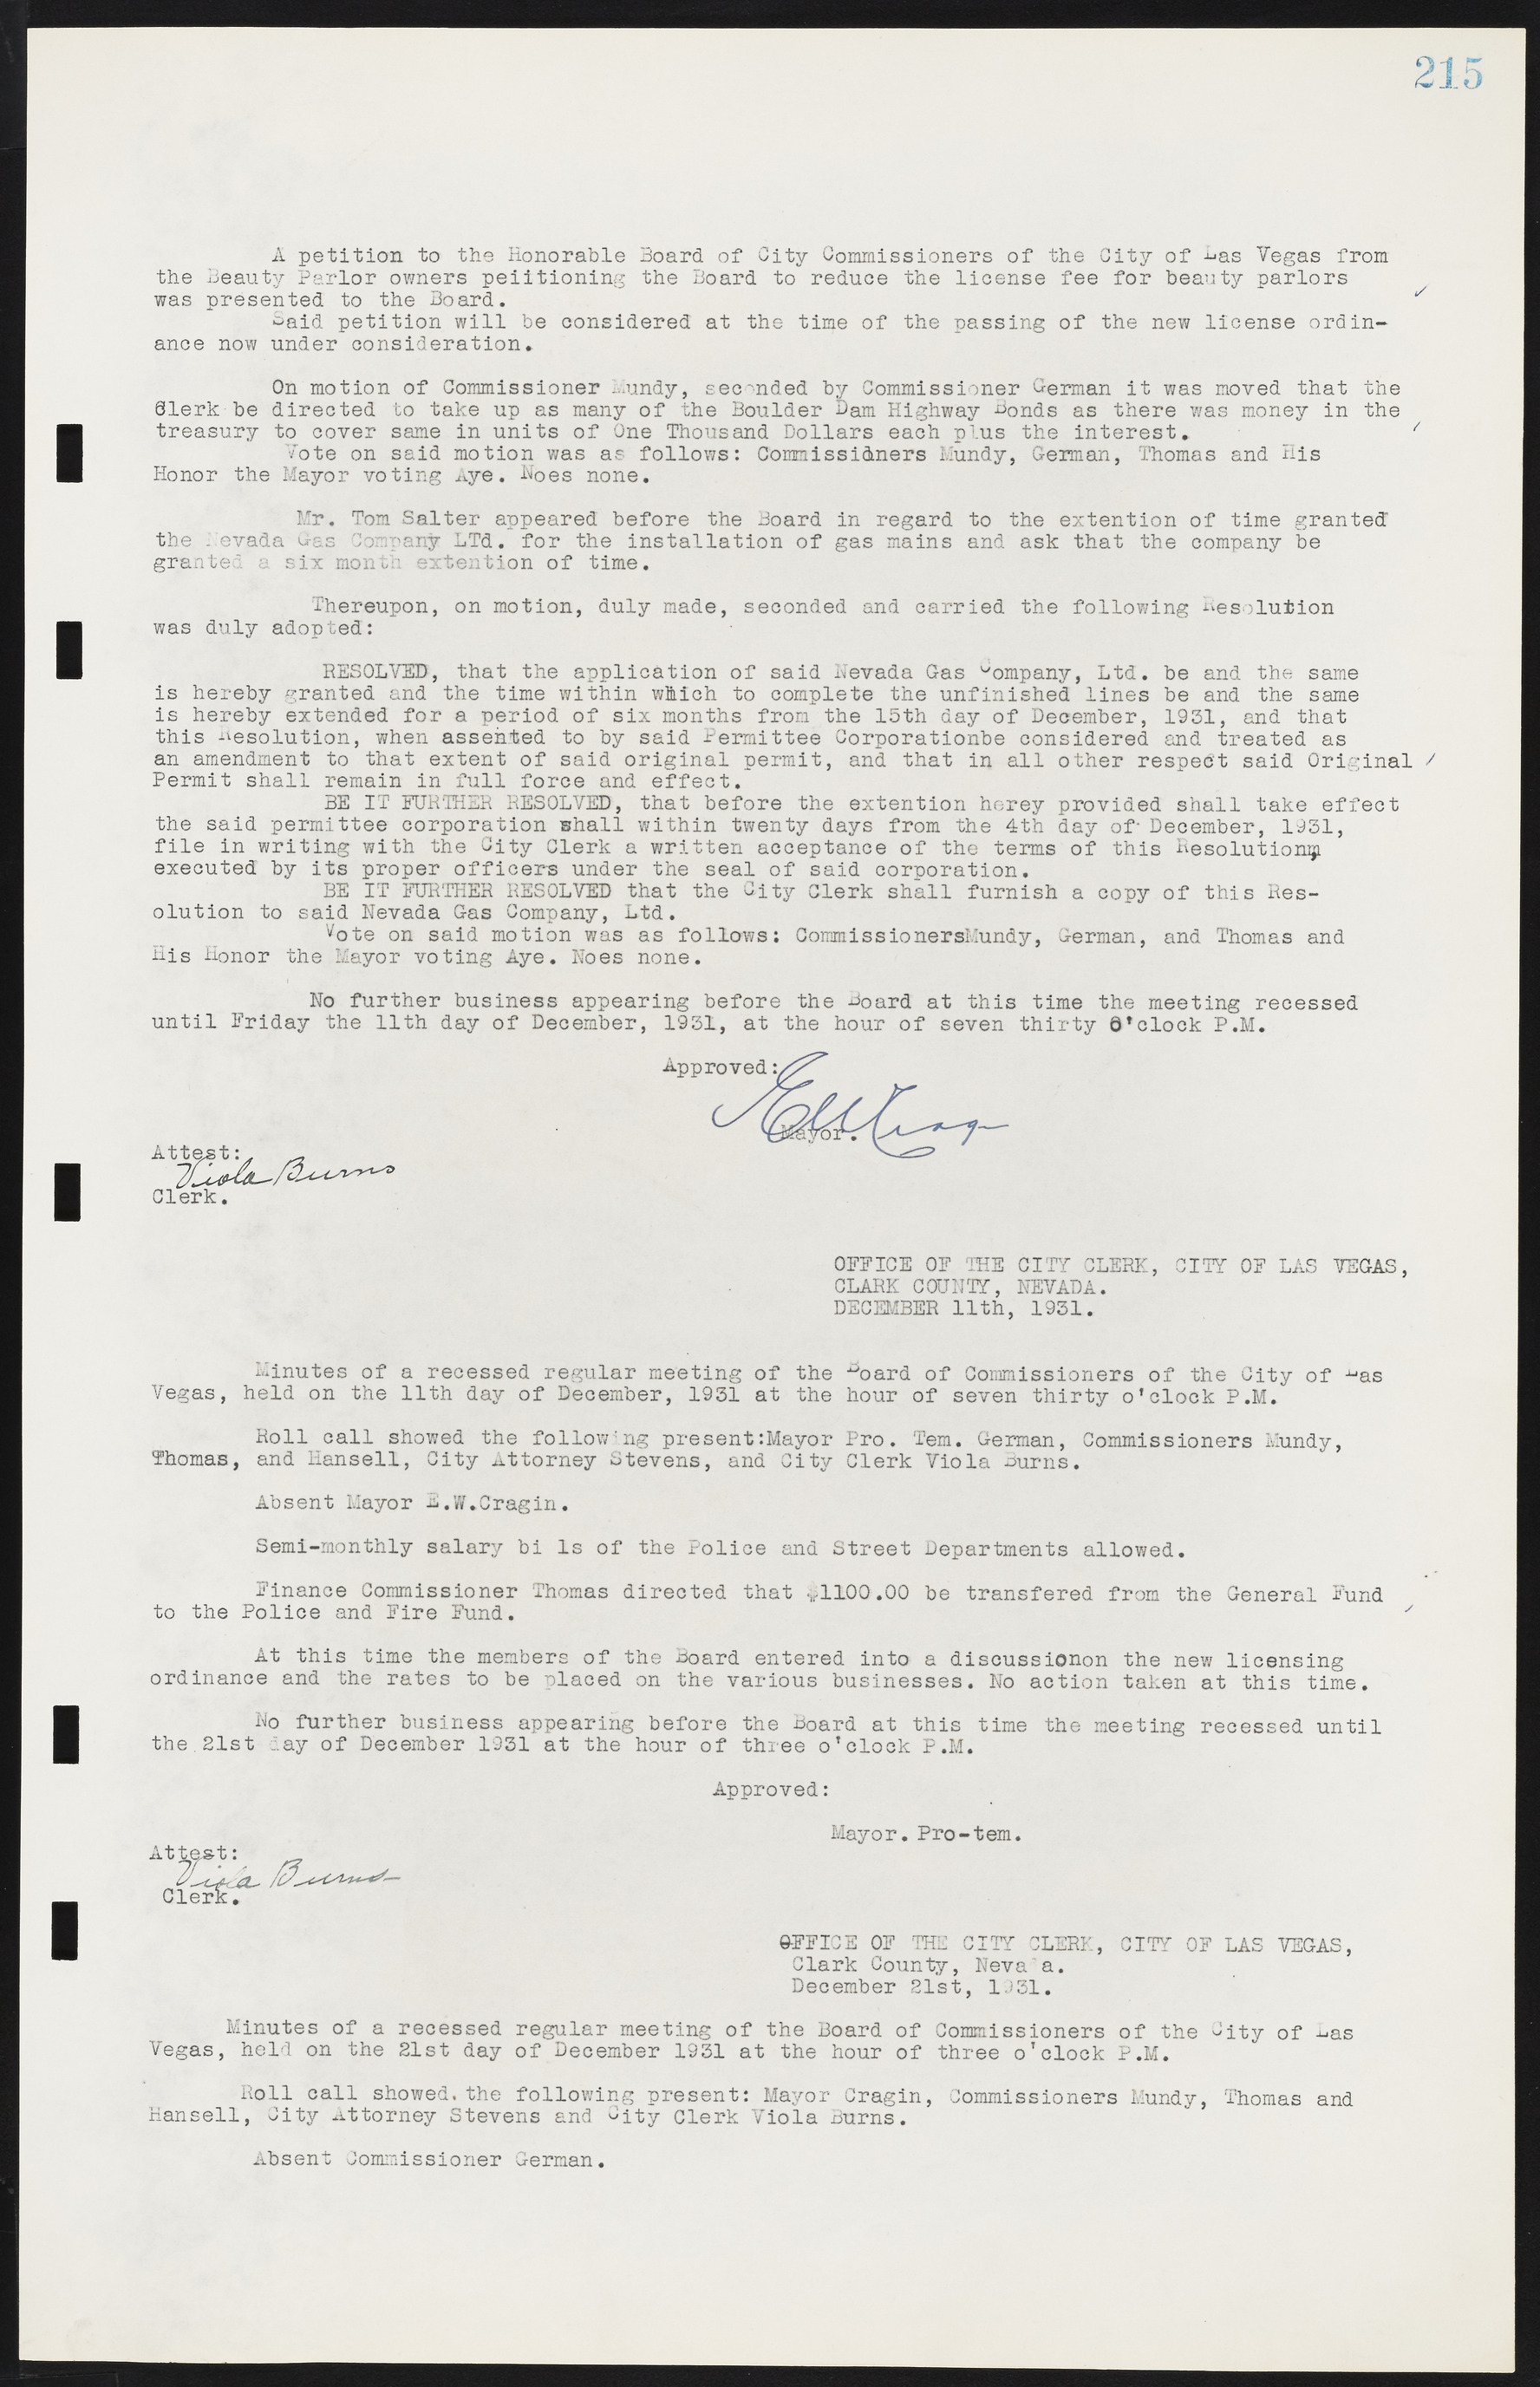 Las Vegas City Commission Minutes, May 14, 1929 to February 11, 1937, lvc000003-221